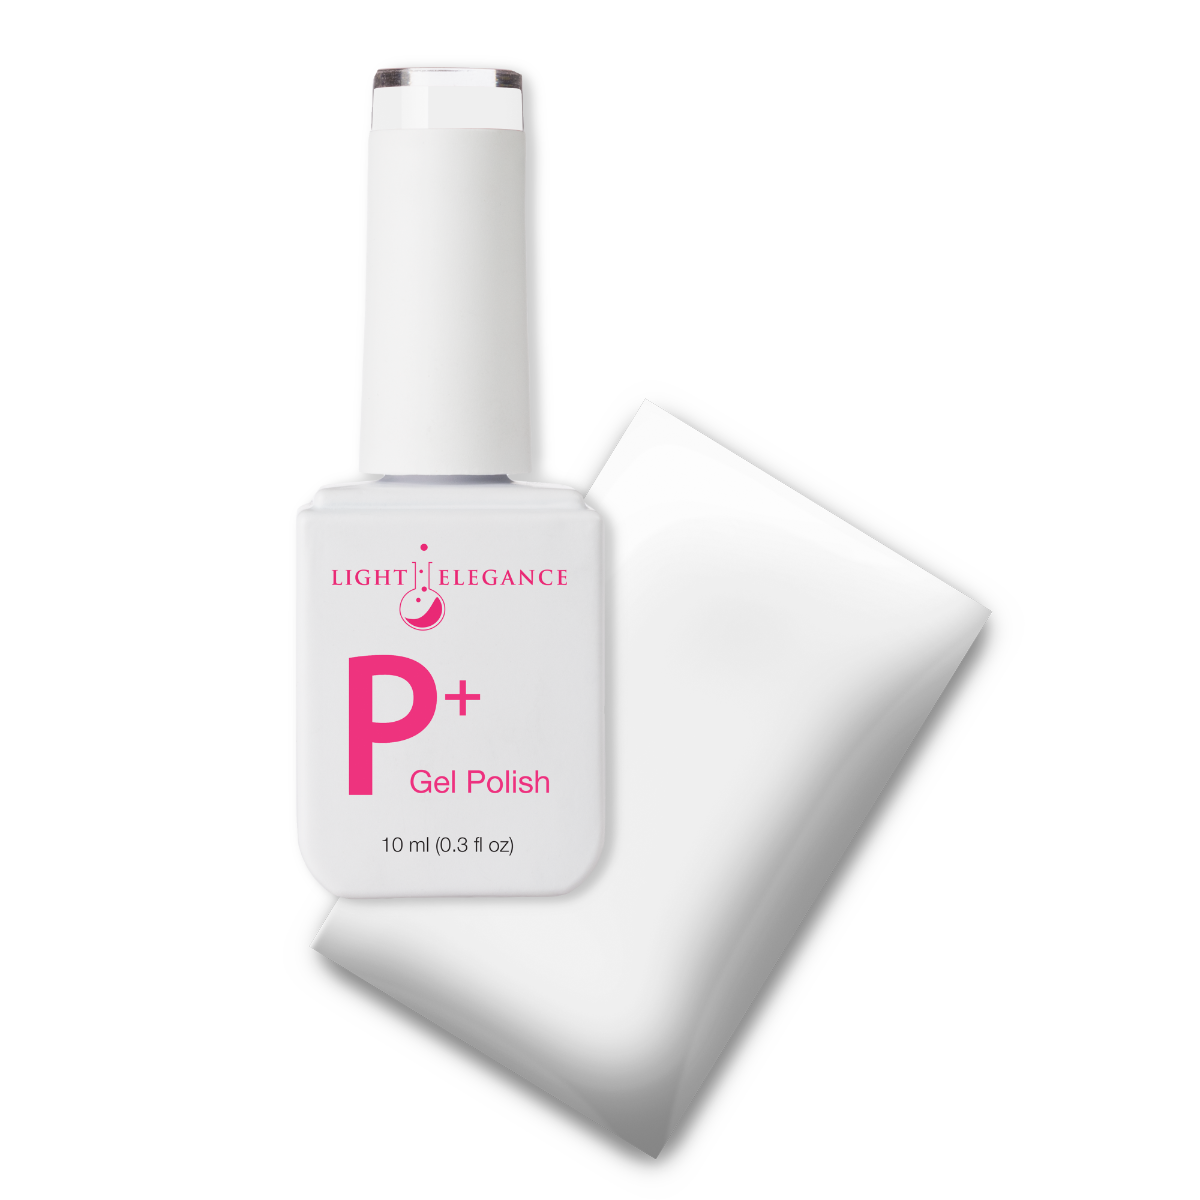 Light Elegance P+ Soak Off Color Gel - Classic White :: New Packaging - Creata Beauty - Professional Beauty Products